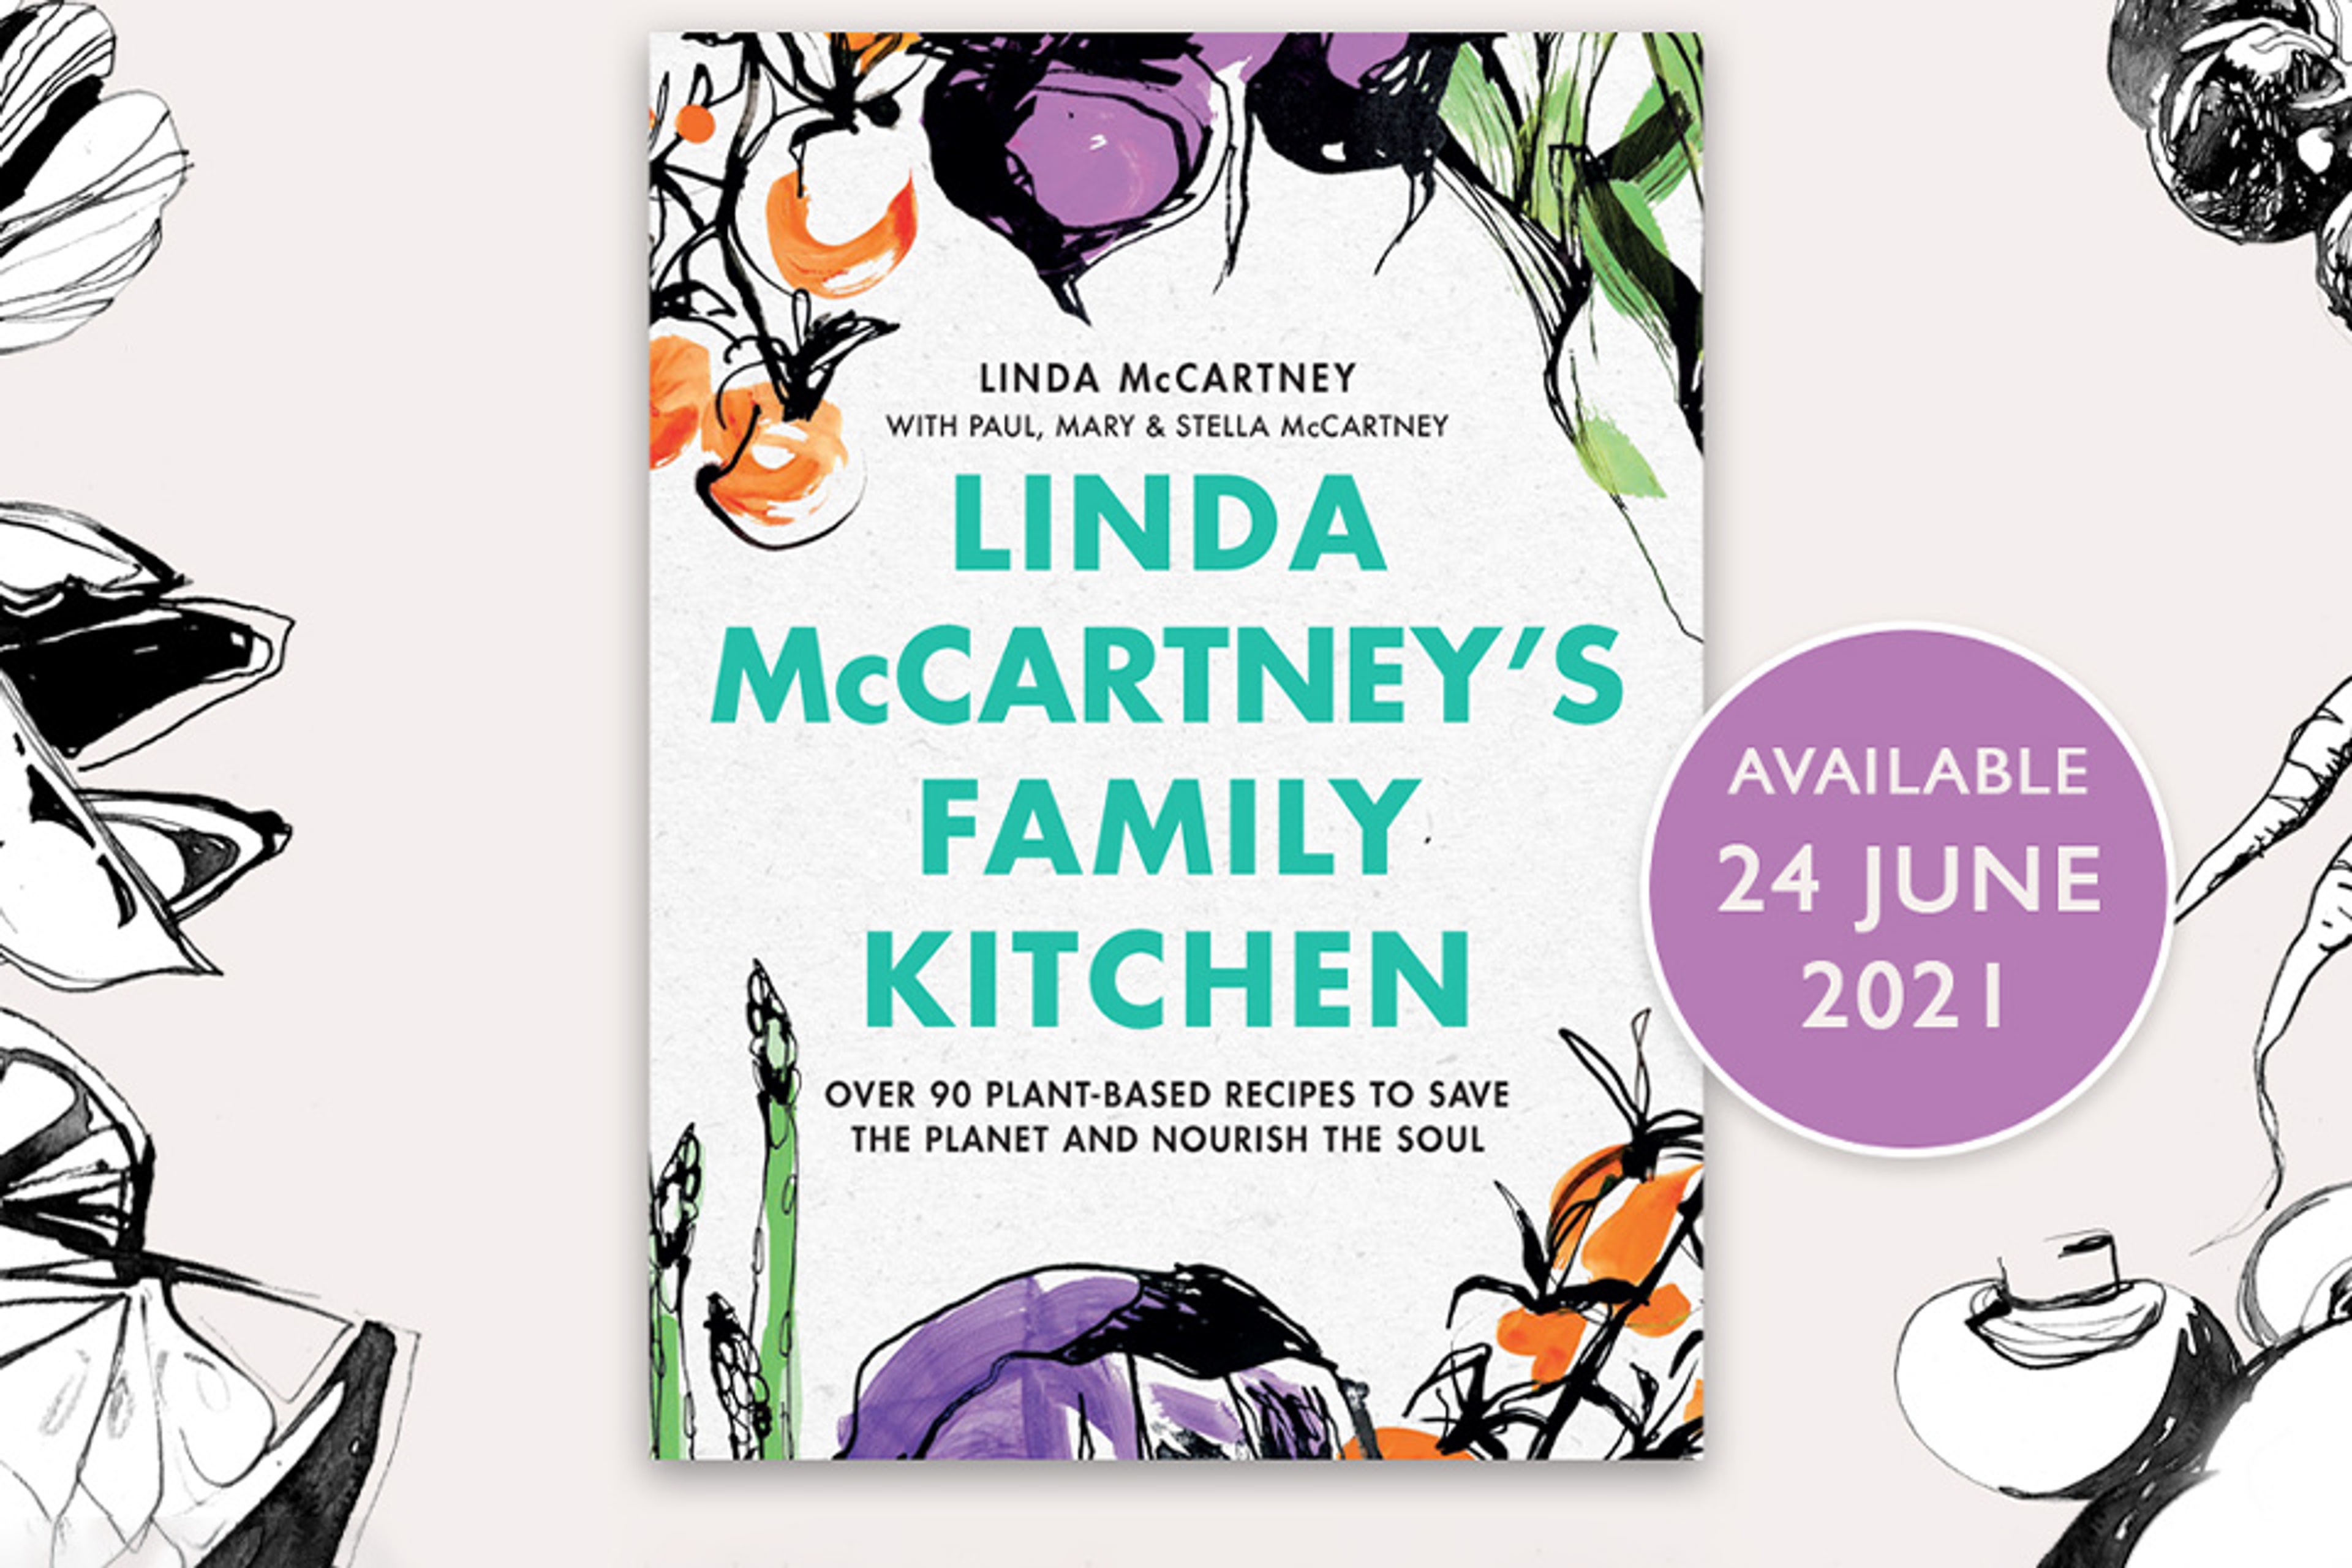 The cover for 'Linda McCartney’s Family Kitchen' by Linda, Paul, Mary and Stella McCartney